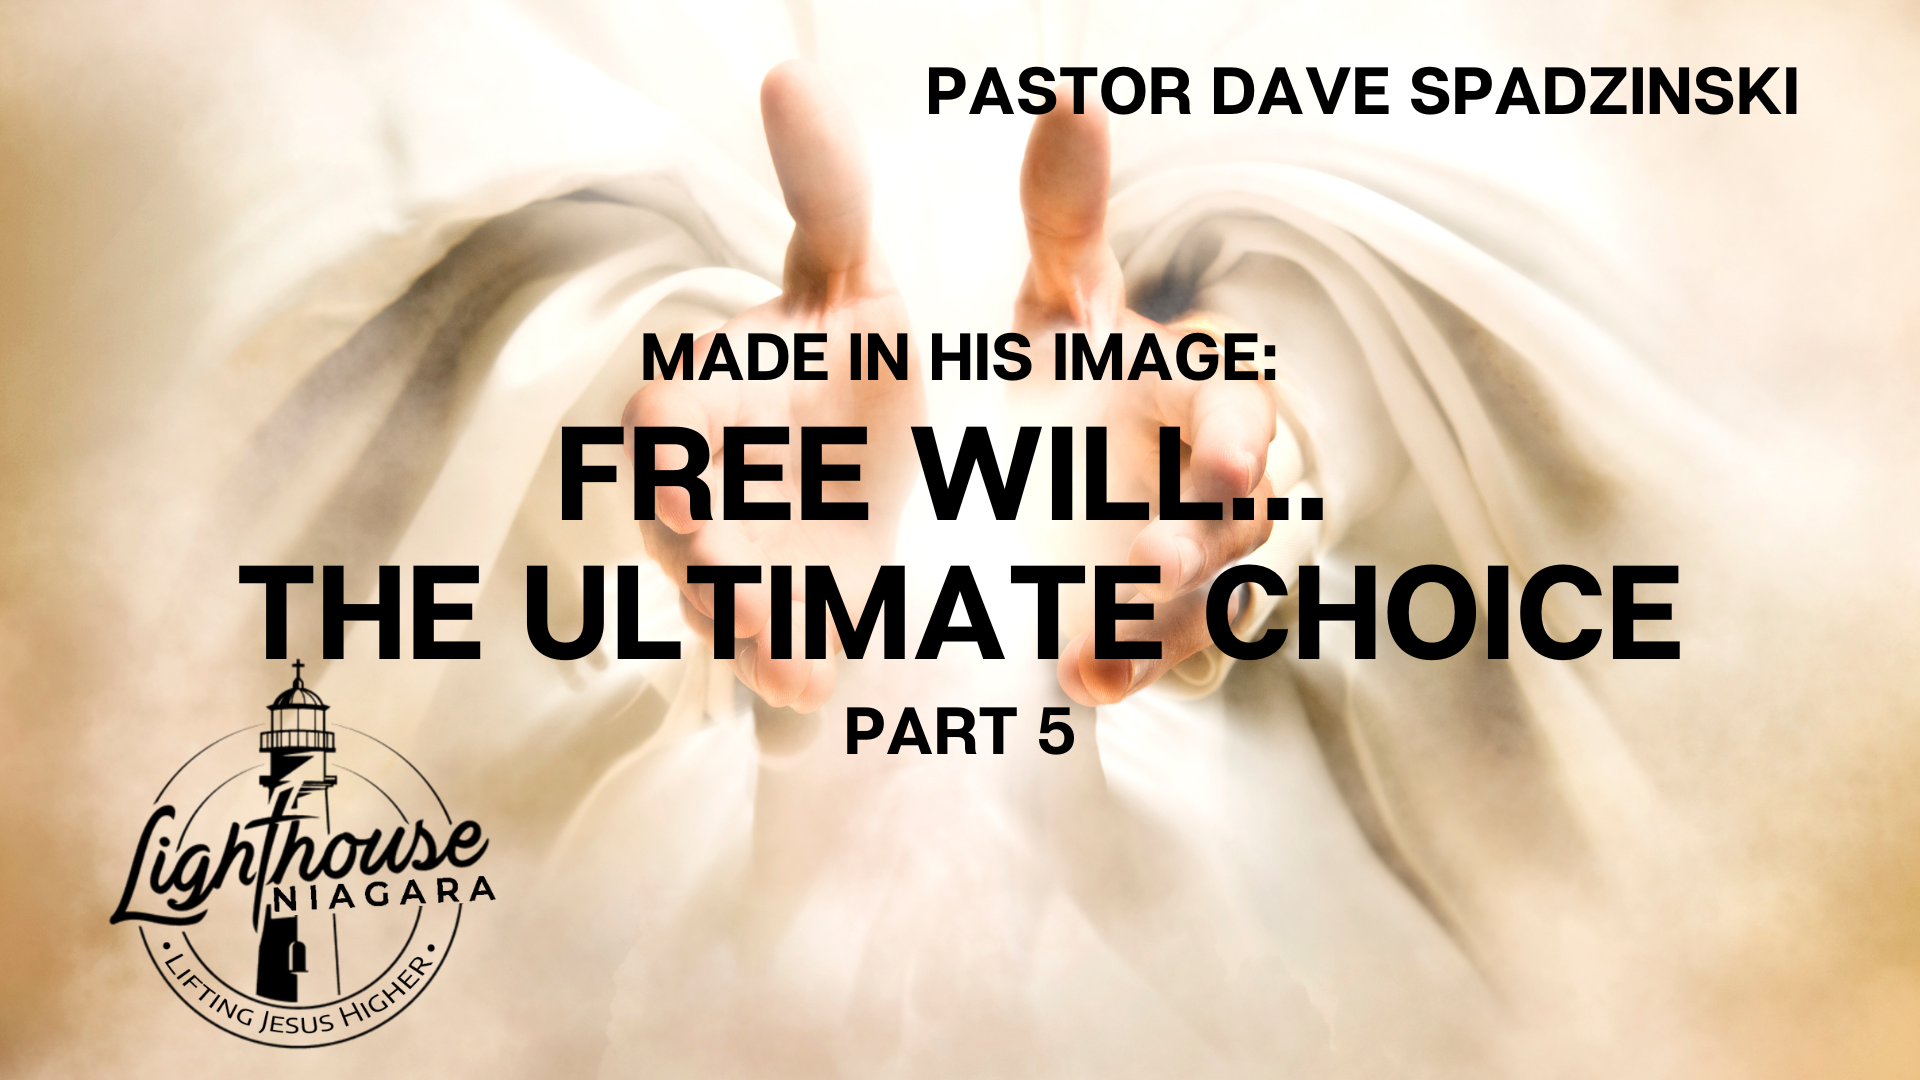 Made In His Image: Free Will... The Ultimate Choice - Pastor Dave Spadzinski